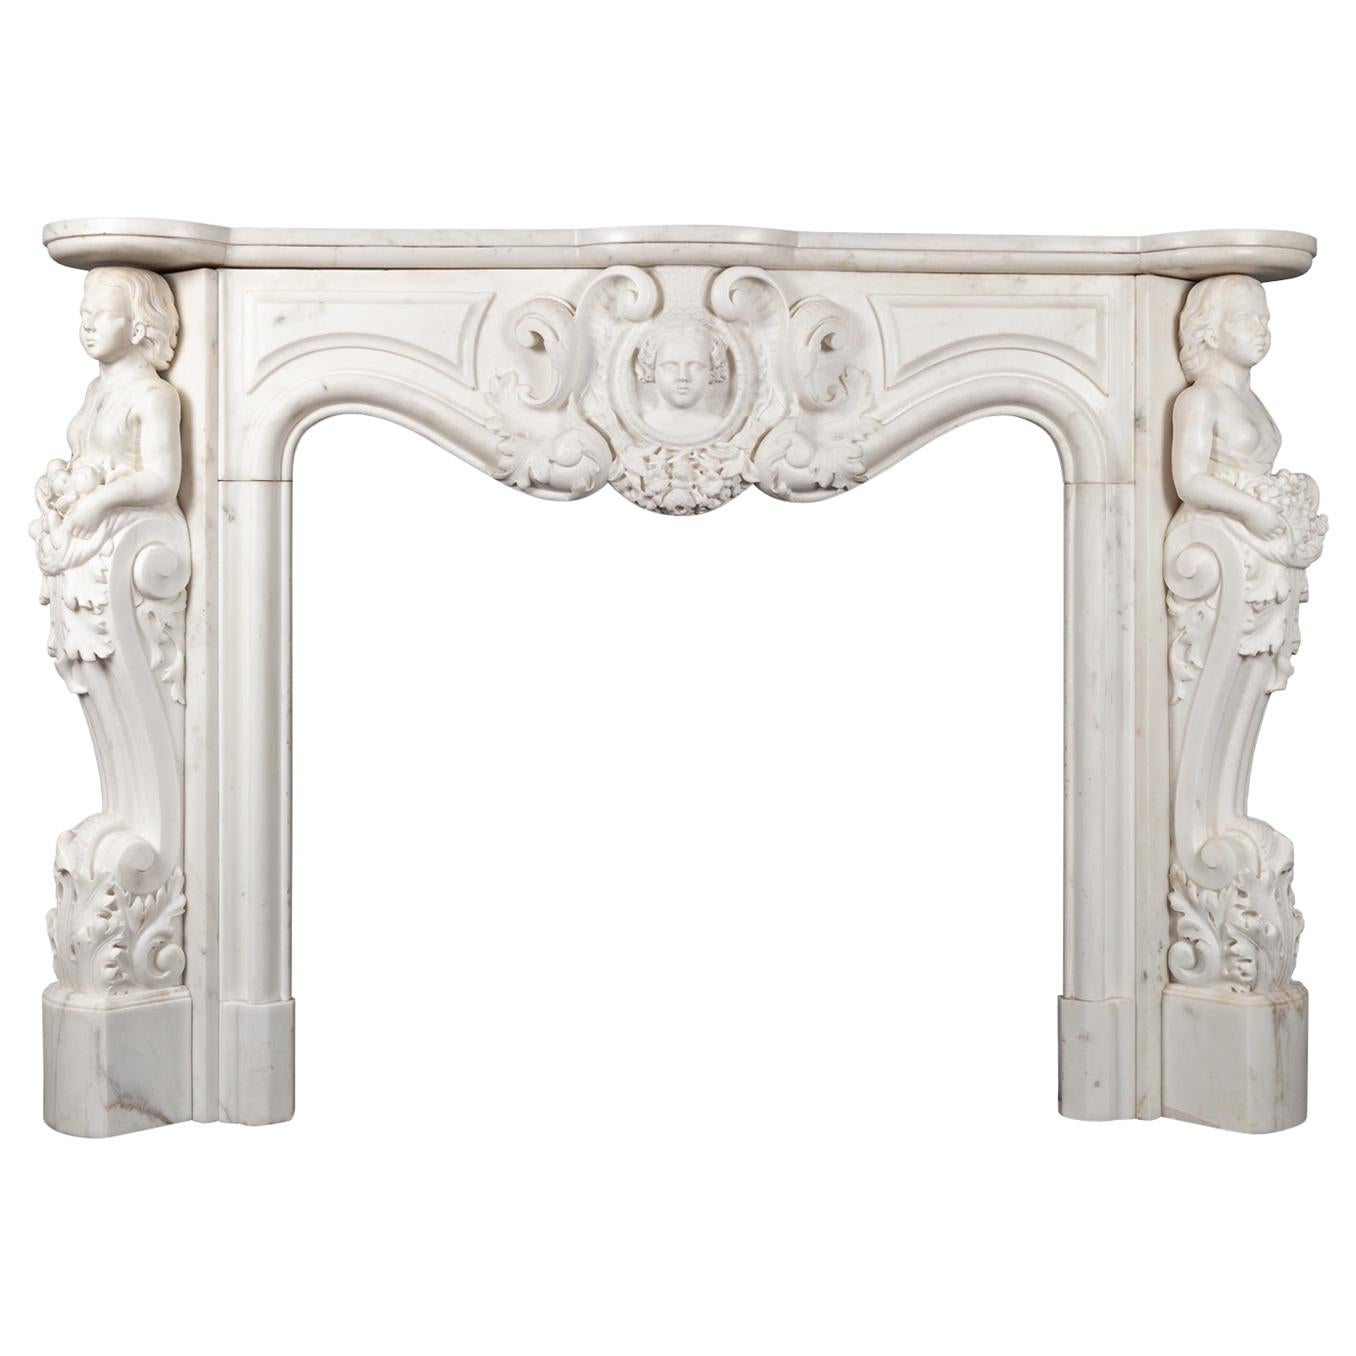 Antique French Statuary Carrara Marble Mantel For Sale